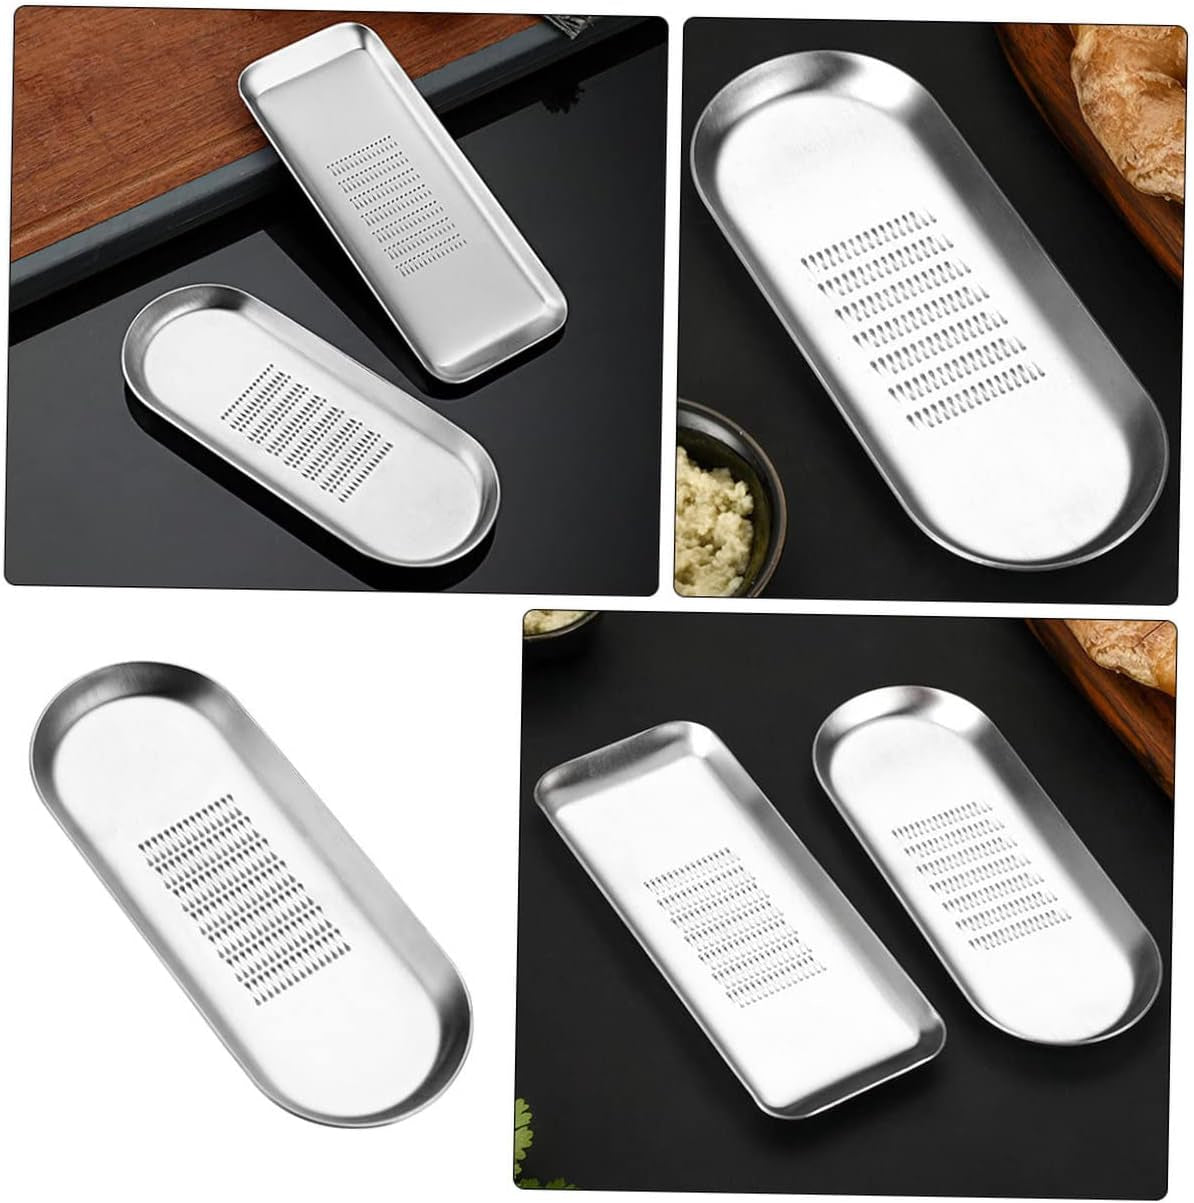 Angoily Stainless Steel Ginger Grinder Kitchen Supplies Micro Plane Grater Manual Potato Grater Citrus Zester Grated Carrots Wasabi Grater Grater Hand Tools to Rotate Cheese  Angoily   